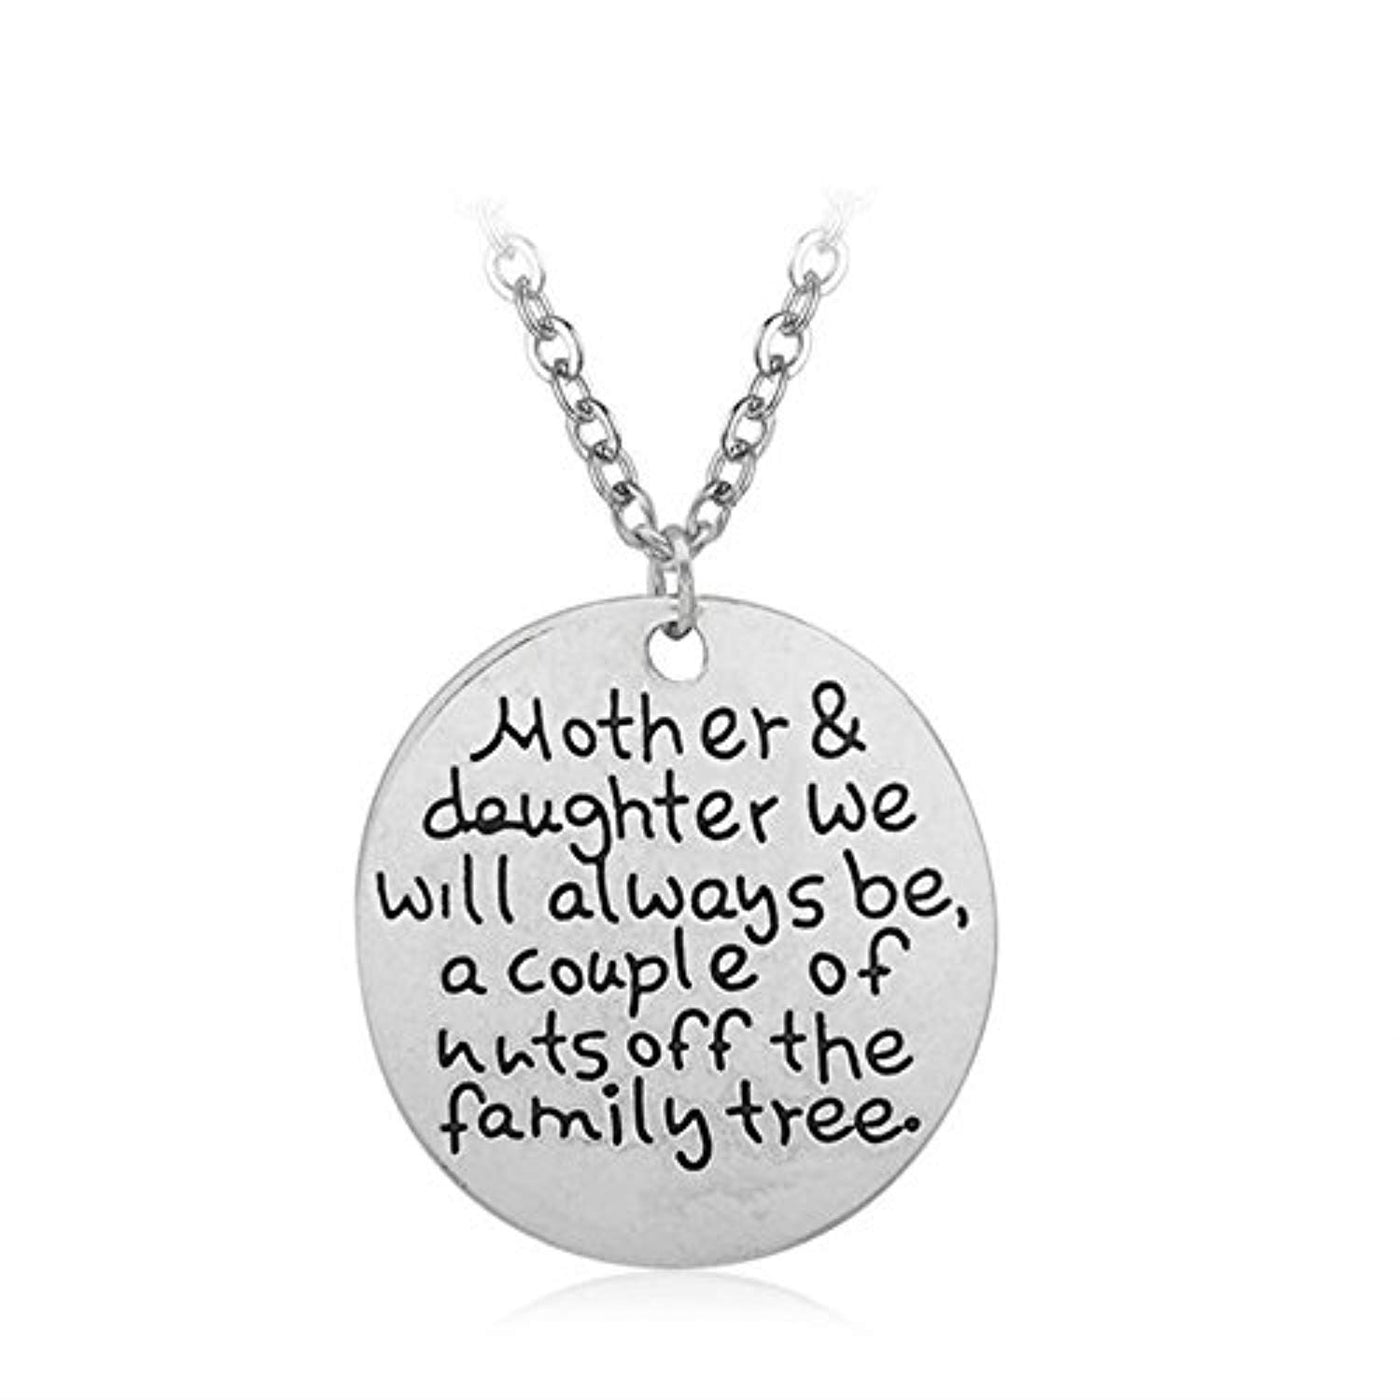 Mother & Daughter "We Will Always Be the Family Tree" Pendant Necklace